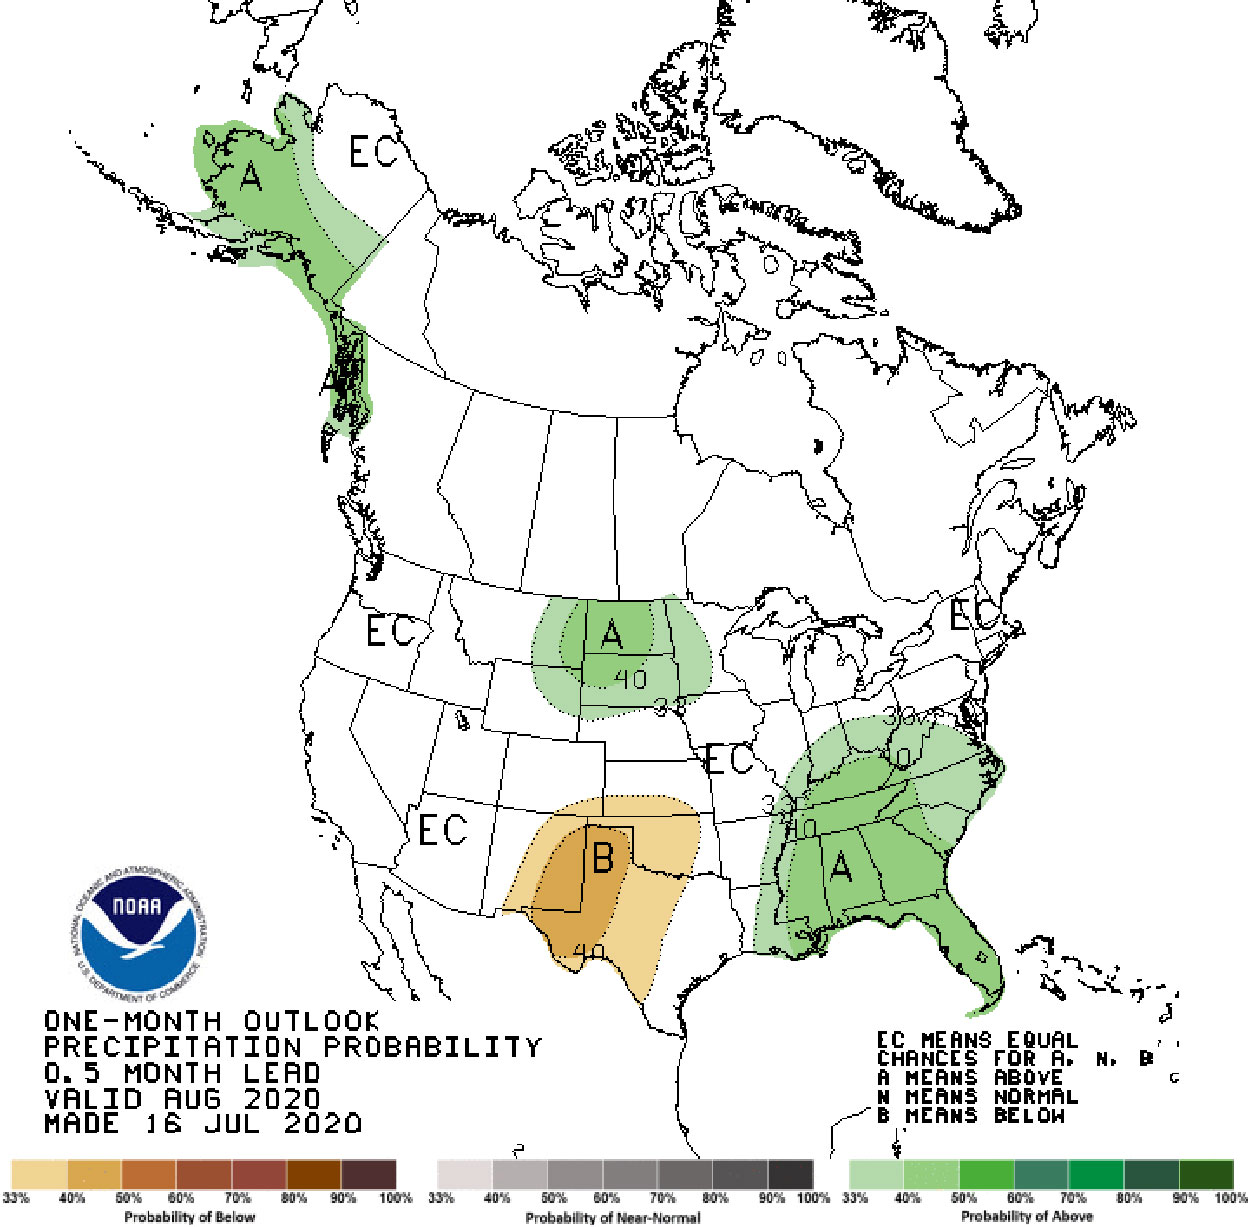 NOAA climate map with preciptation outlook as of July 12, 2020. Most of South Dakota is predicted to have average to above average precipitation.